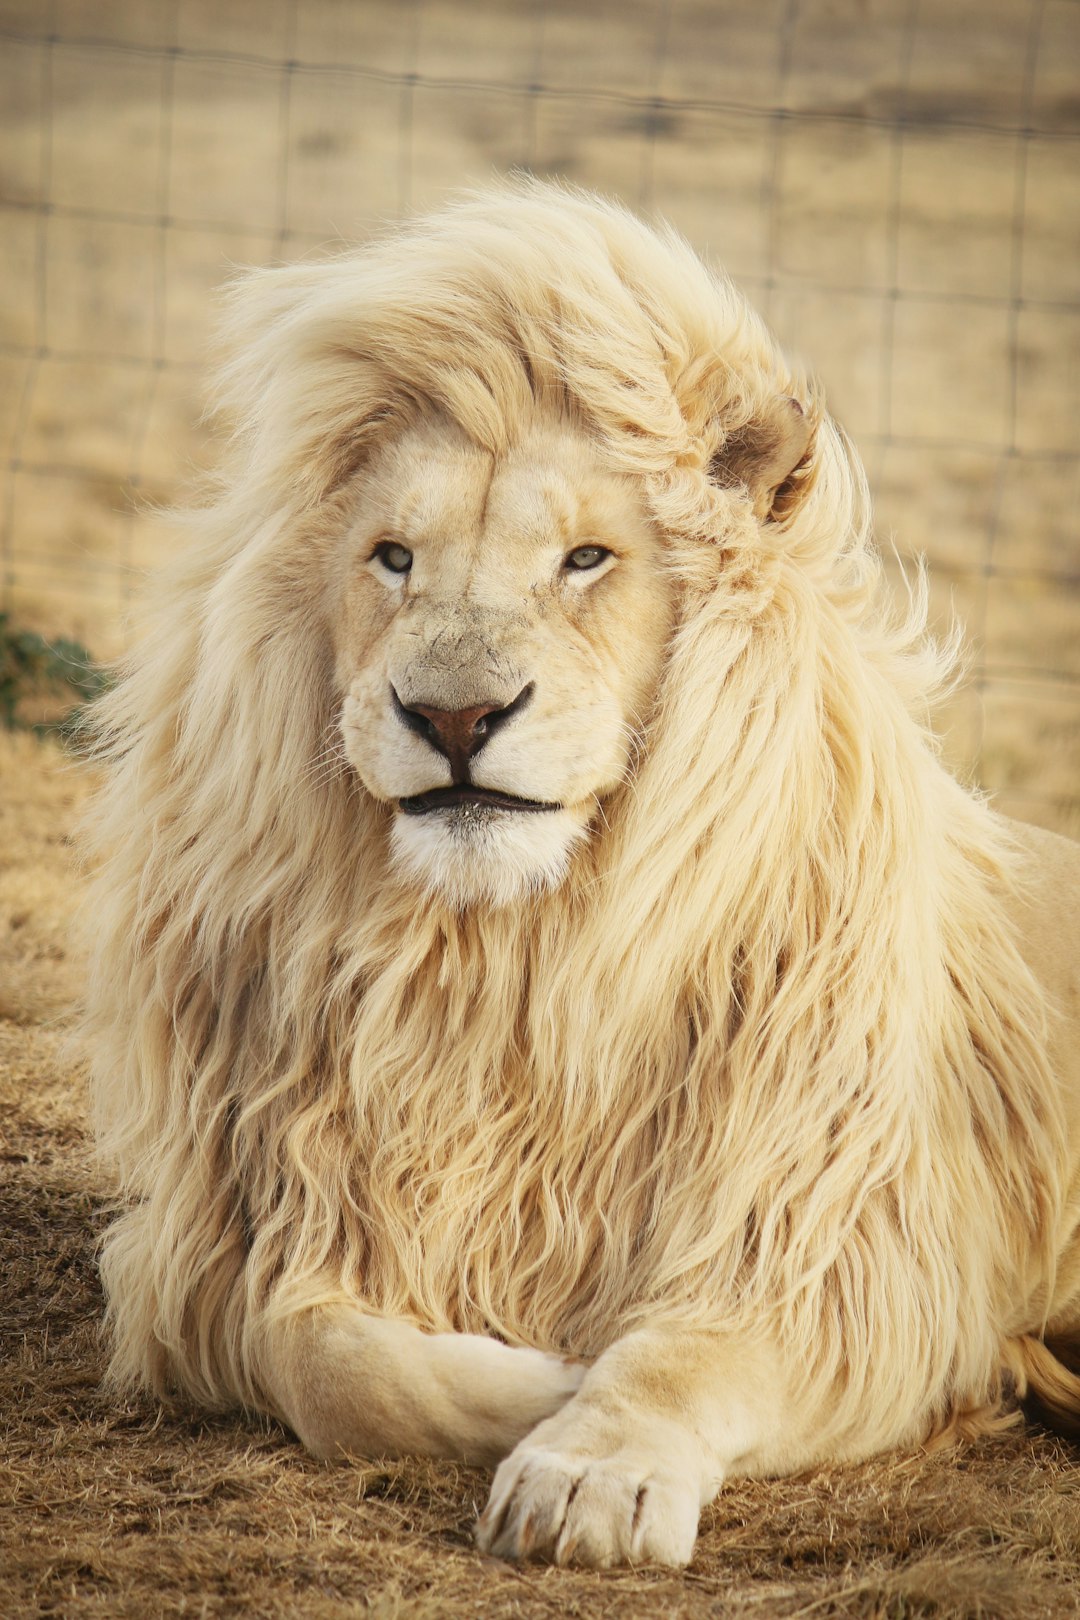 A majestic white lion with its mane flowing in the wind, resting on an open field of grass and earth inside his cage at Qalea Hir wholesale market in Bish. A crisp photo in the style of the lion. –ar 85:128